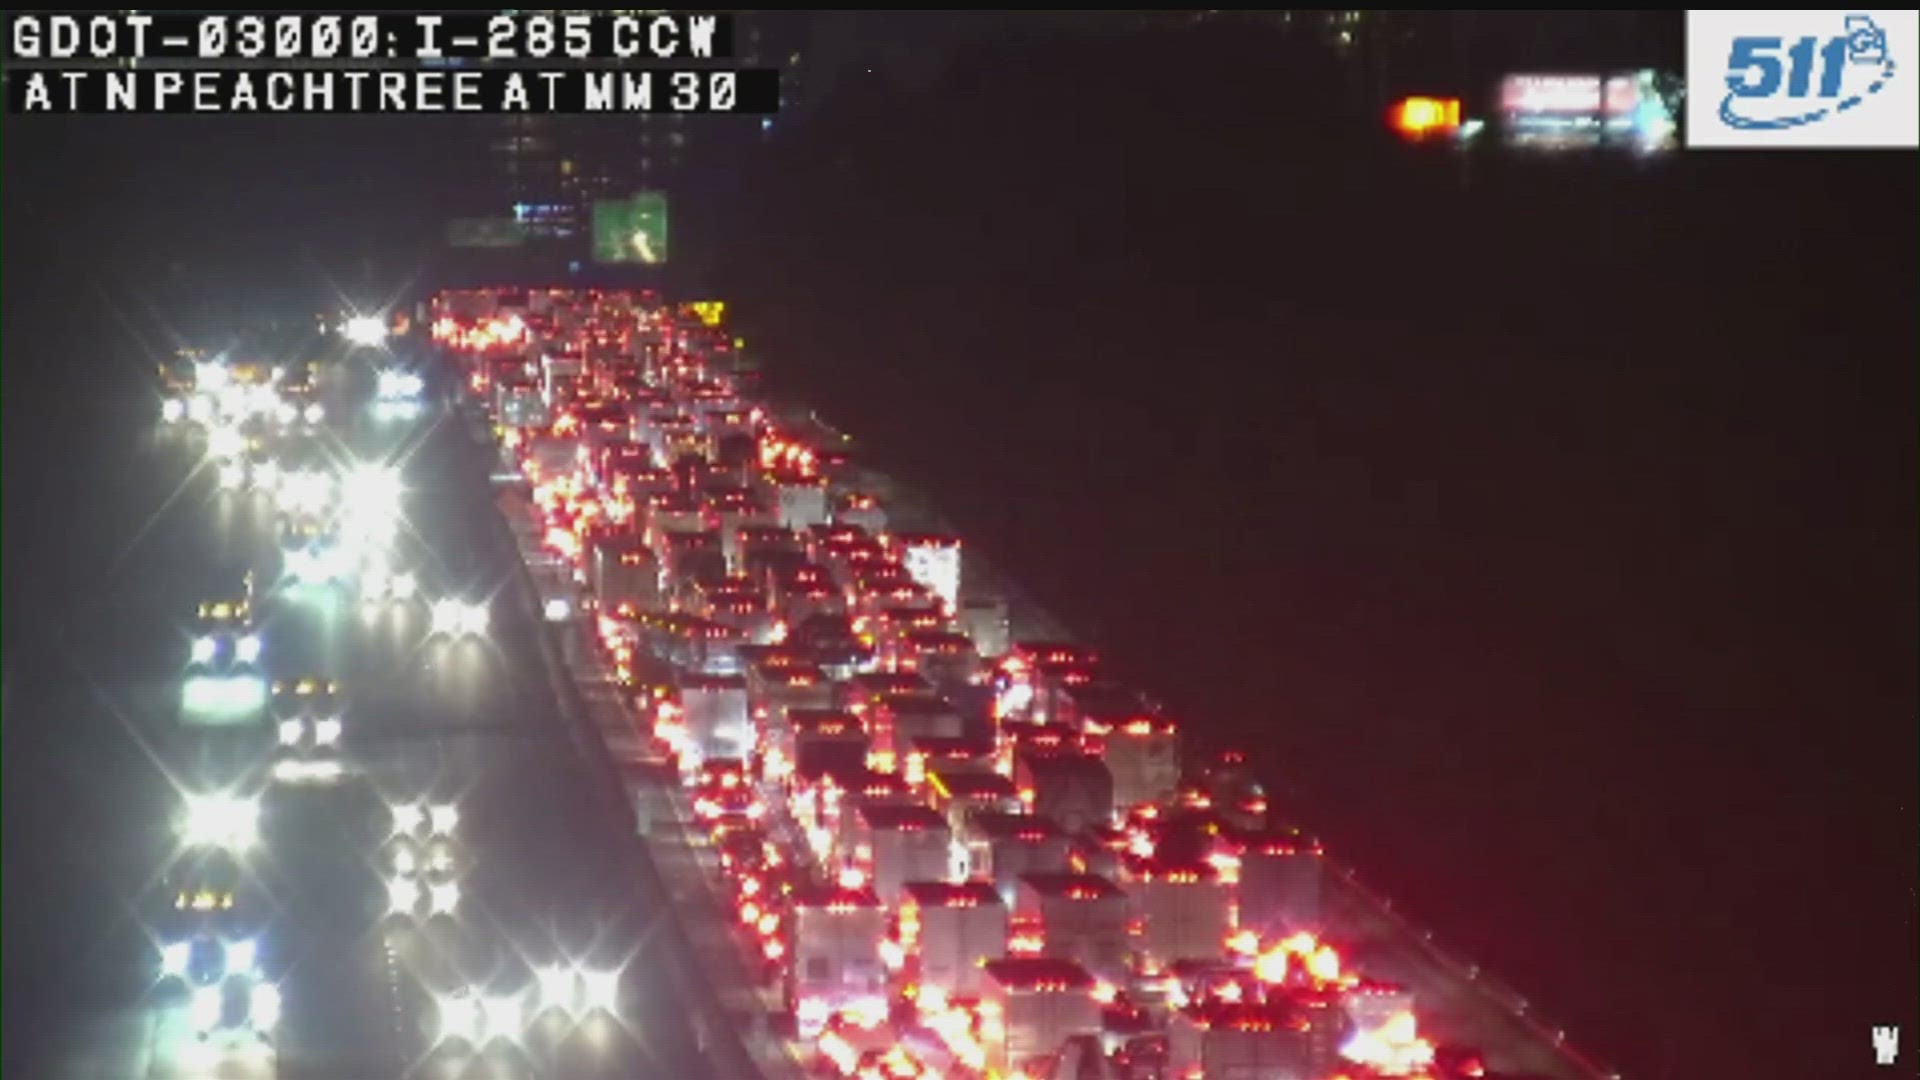 Nearly all lanes are closed on Interstate 285 heading westbound in Dunwoody due to a crash, according to officials on Wednesday.